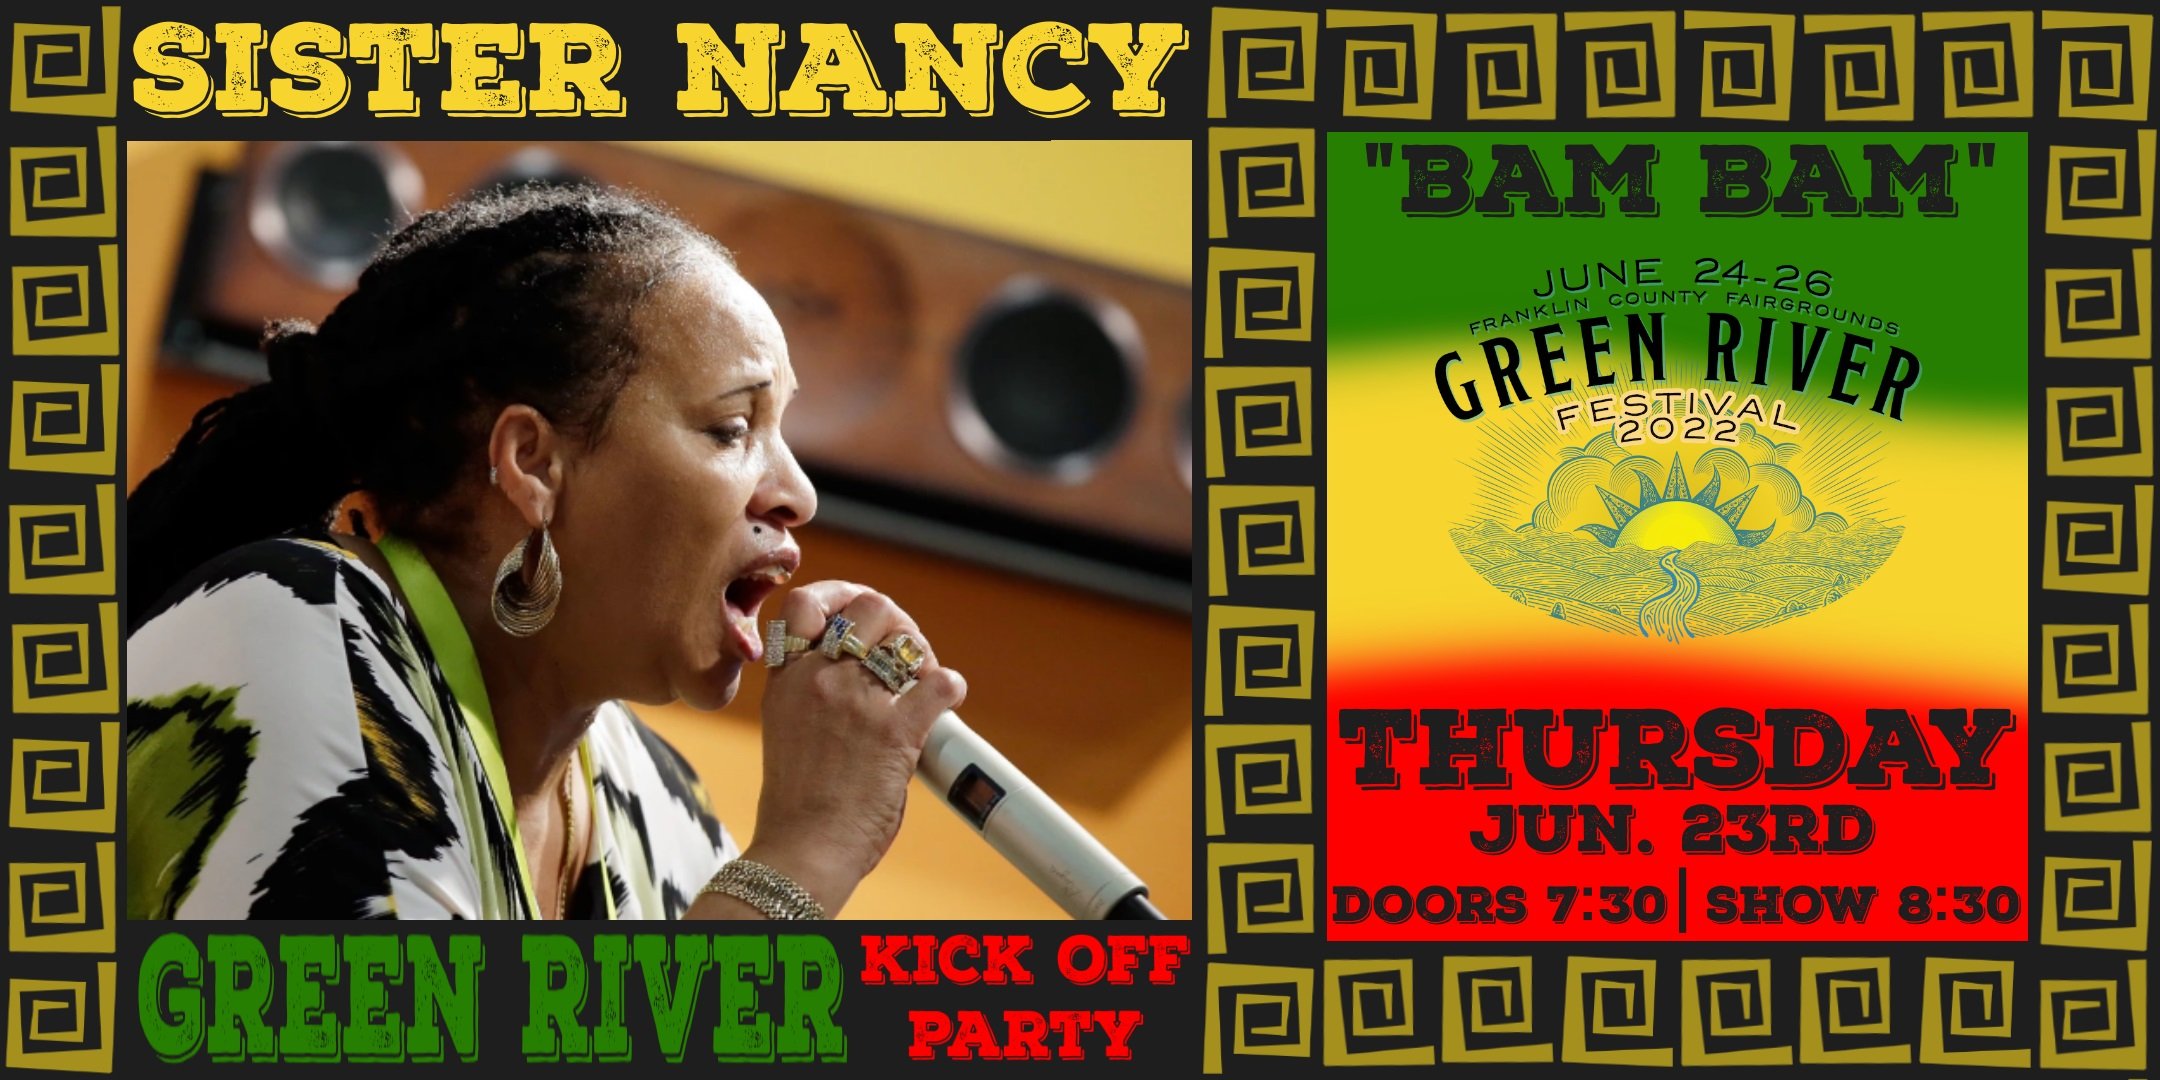 Green River Festival Kick Off Party with Sister Nancy